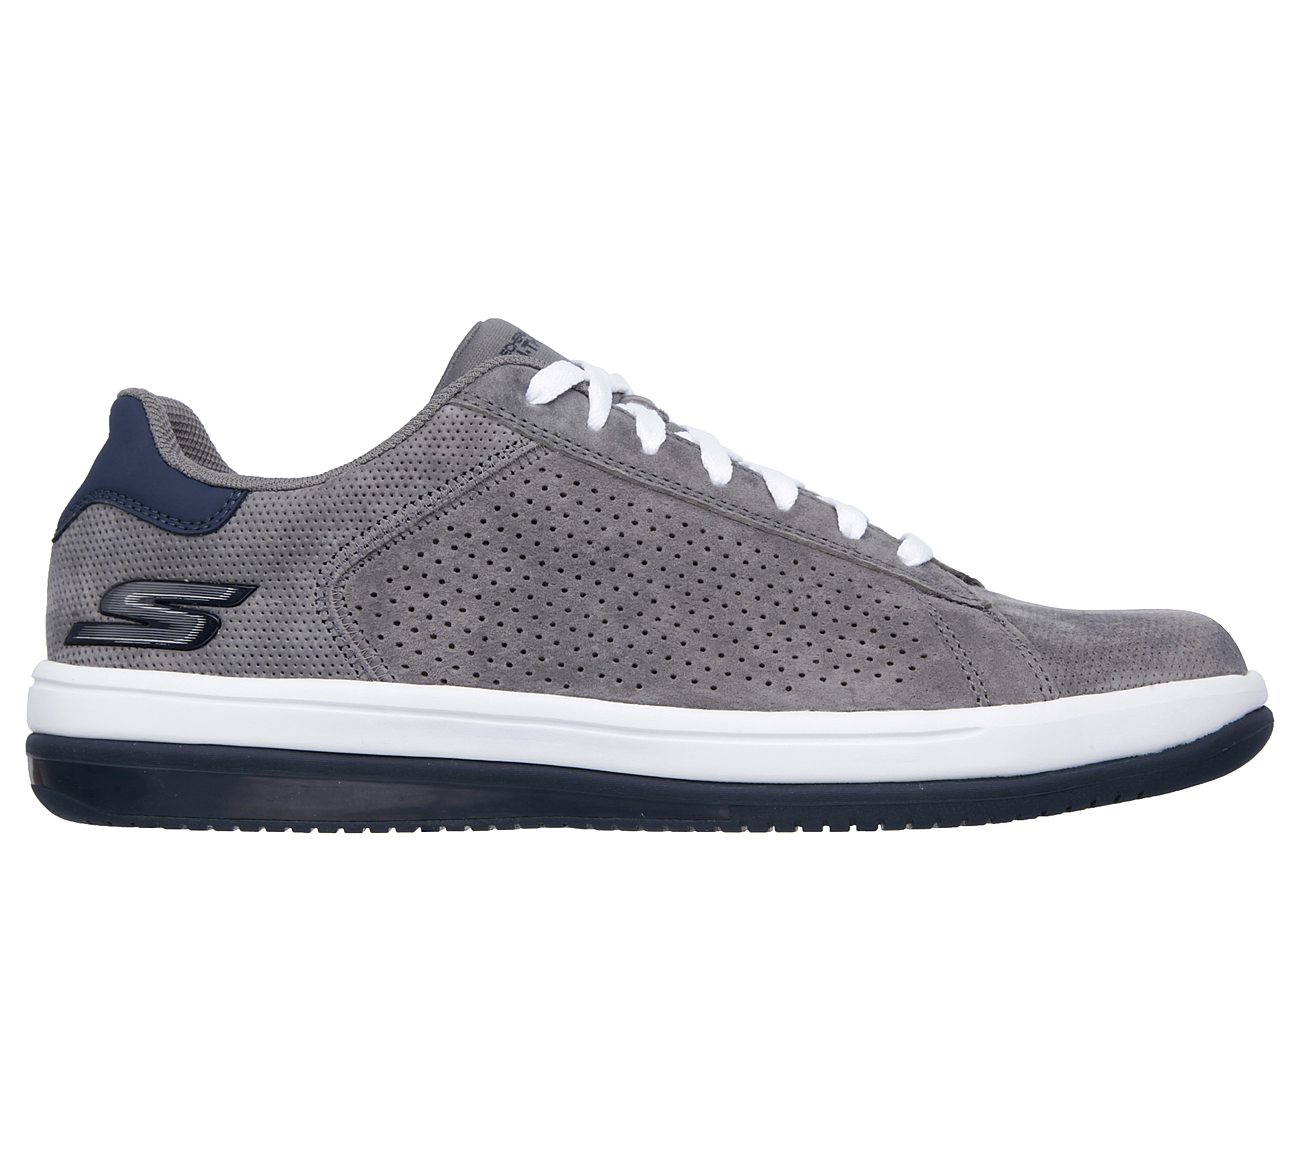 Buy SKECHERS Skechers On the GO - Compass On the GO Shoes